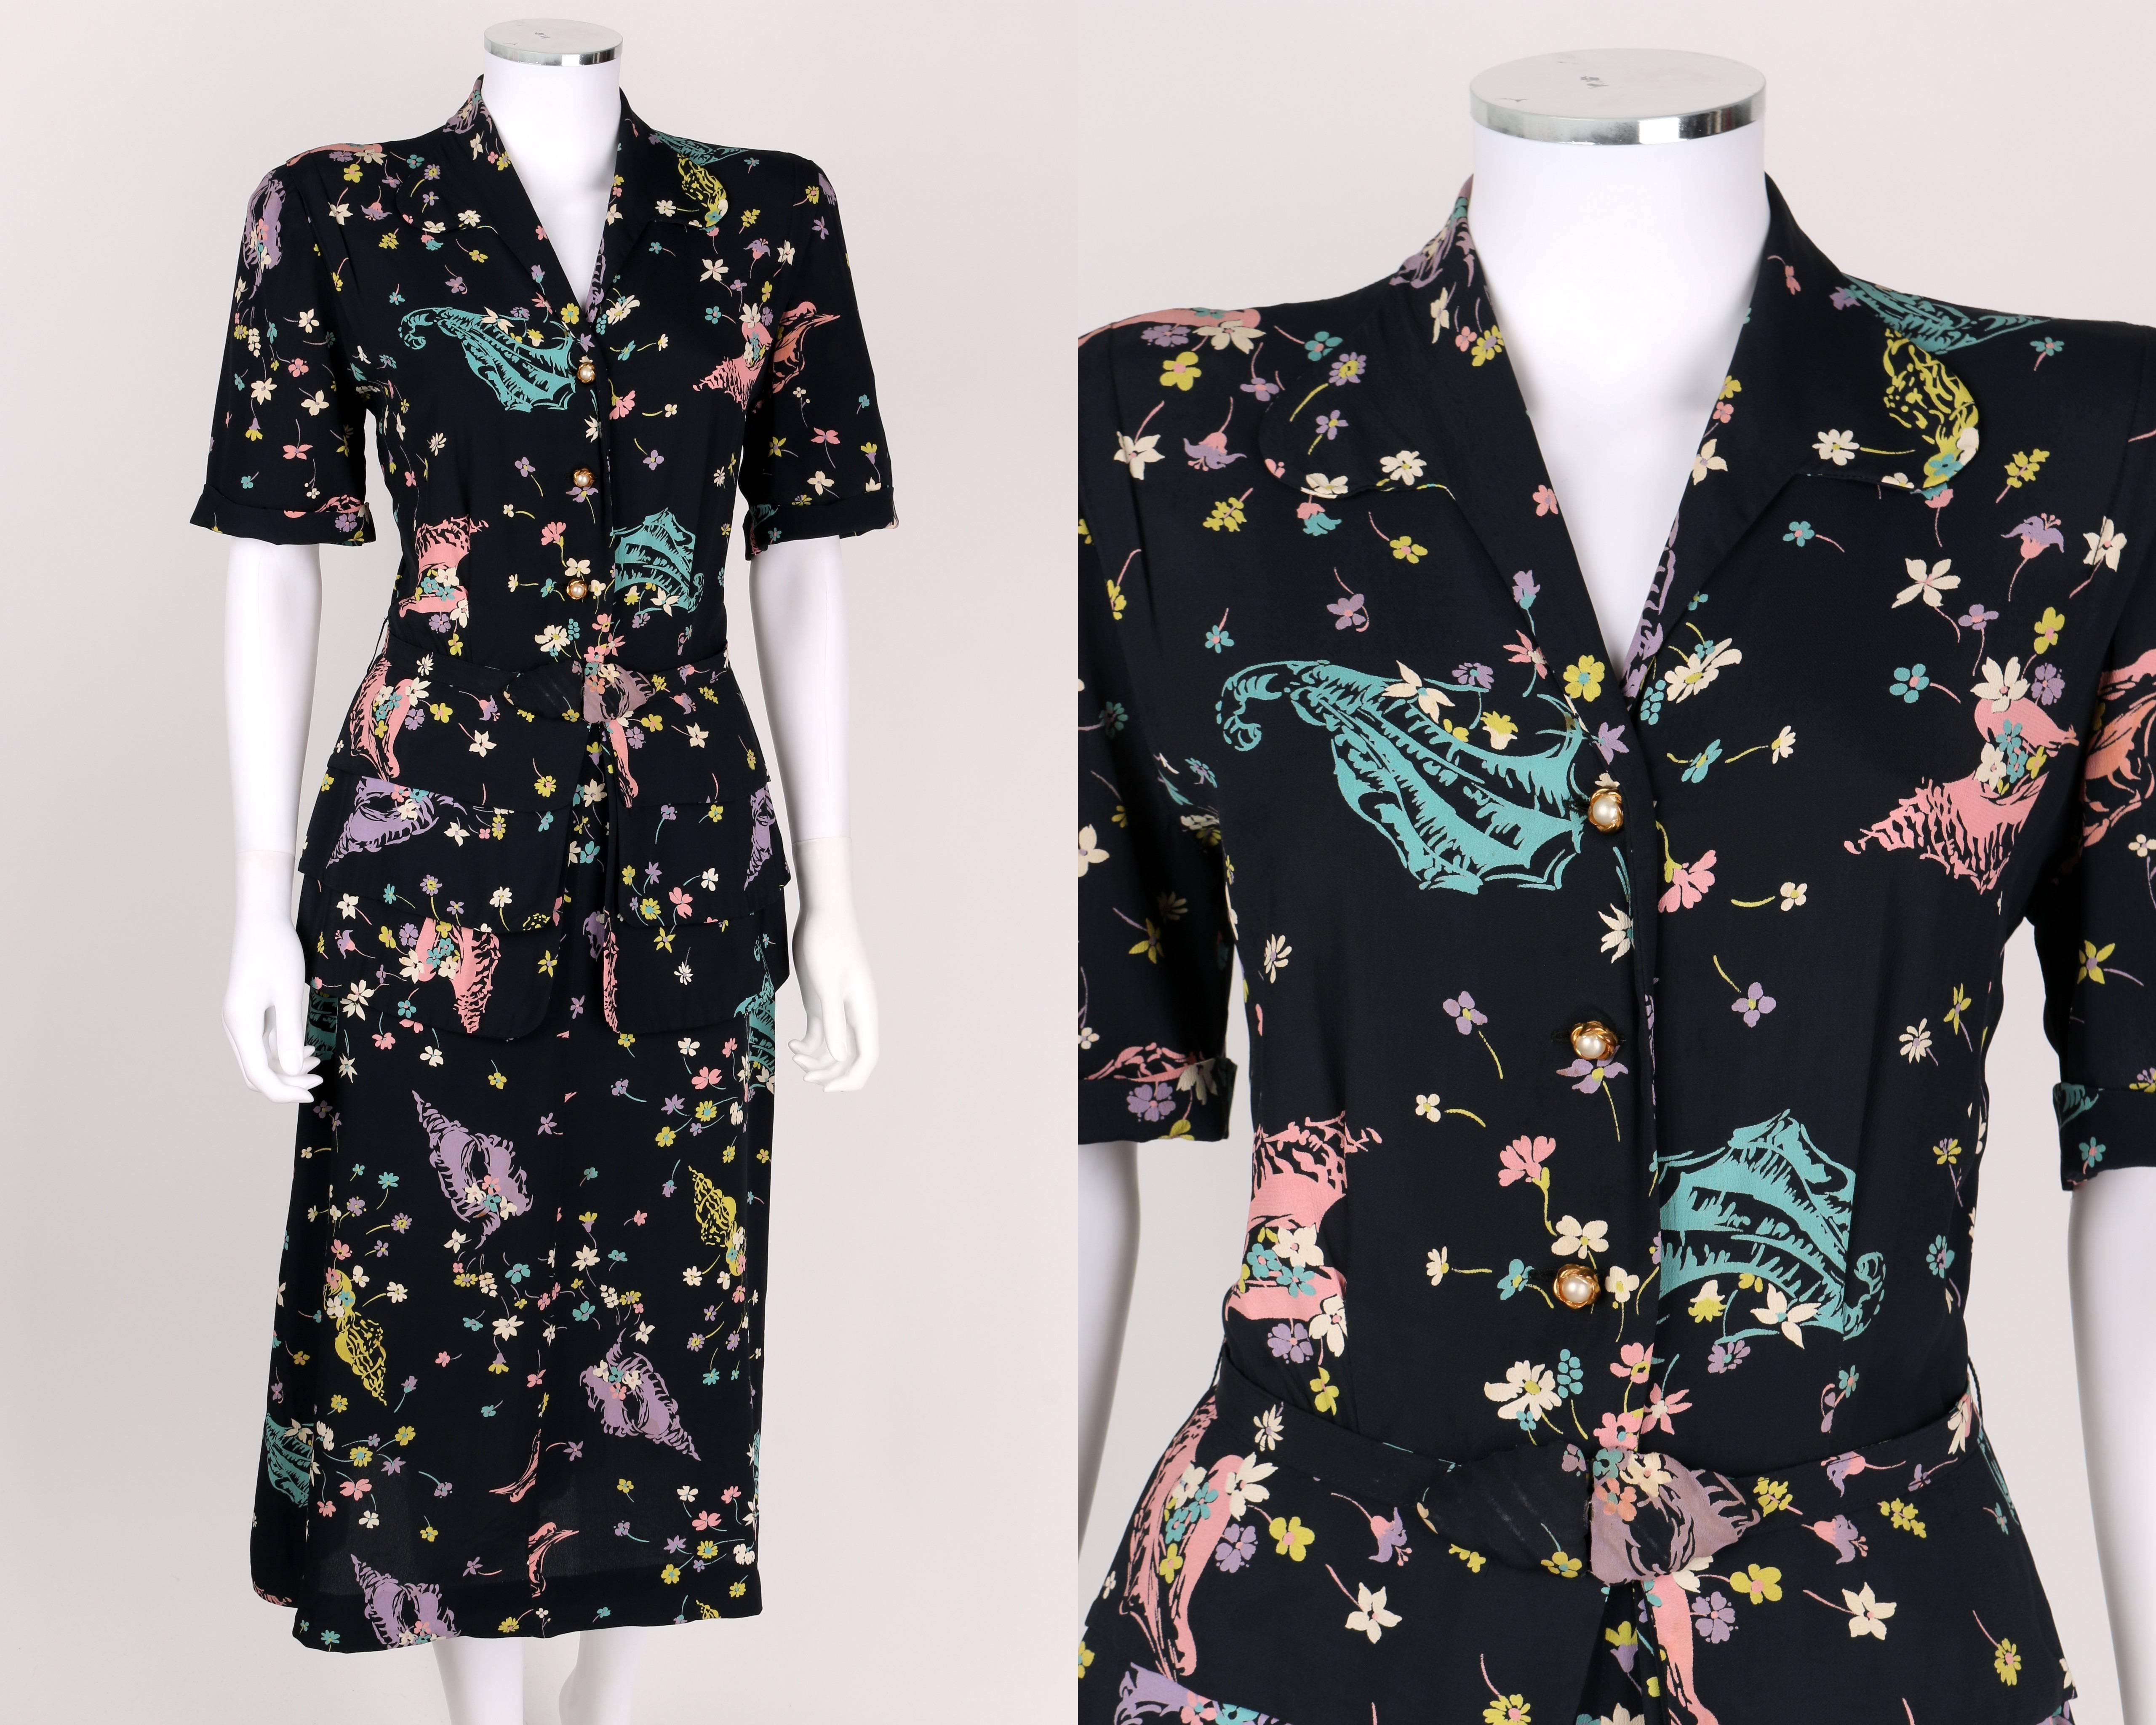 Vintage Georgiana c.1940's Navy blue peplum day dress. Multicolor pastel floral and seashell print on navy blue rayon crepe. Short sleeves with turned up cuff. Rounded lapel collar. Three center front button closures. Gold toned and pearl floral